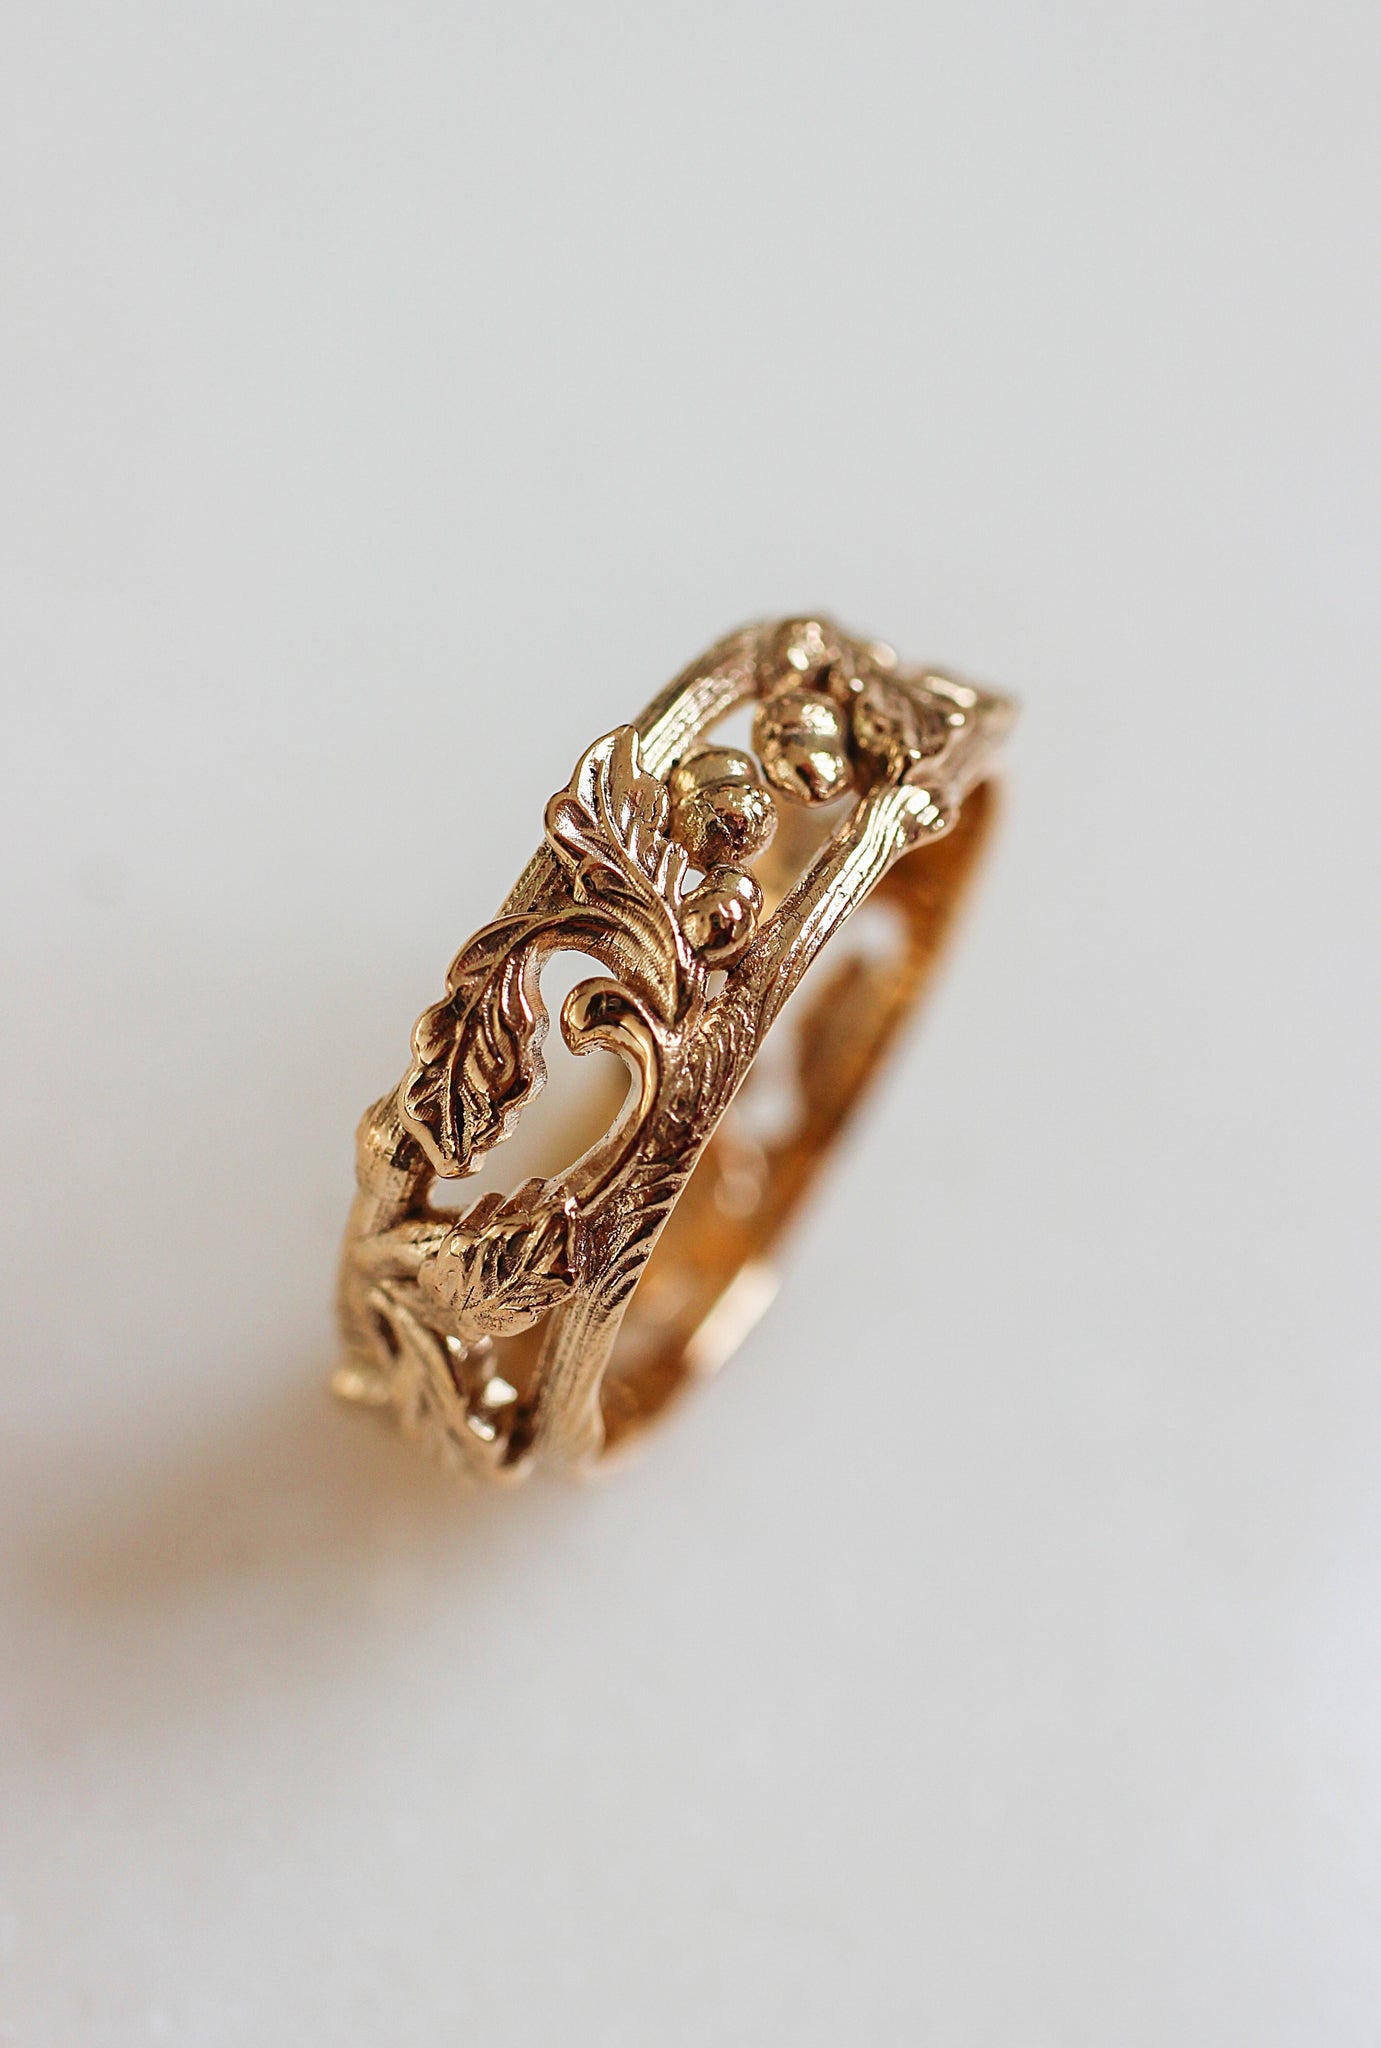 Oak leaves and acorns ring, wedding band for man - Eden Garden Jewelry™